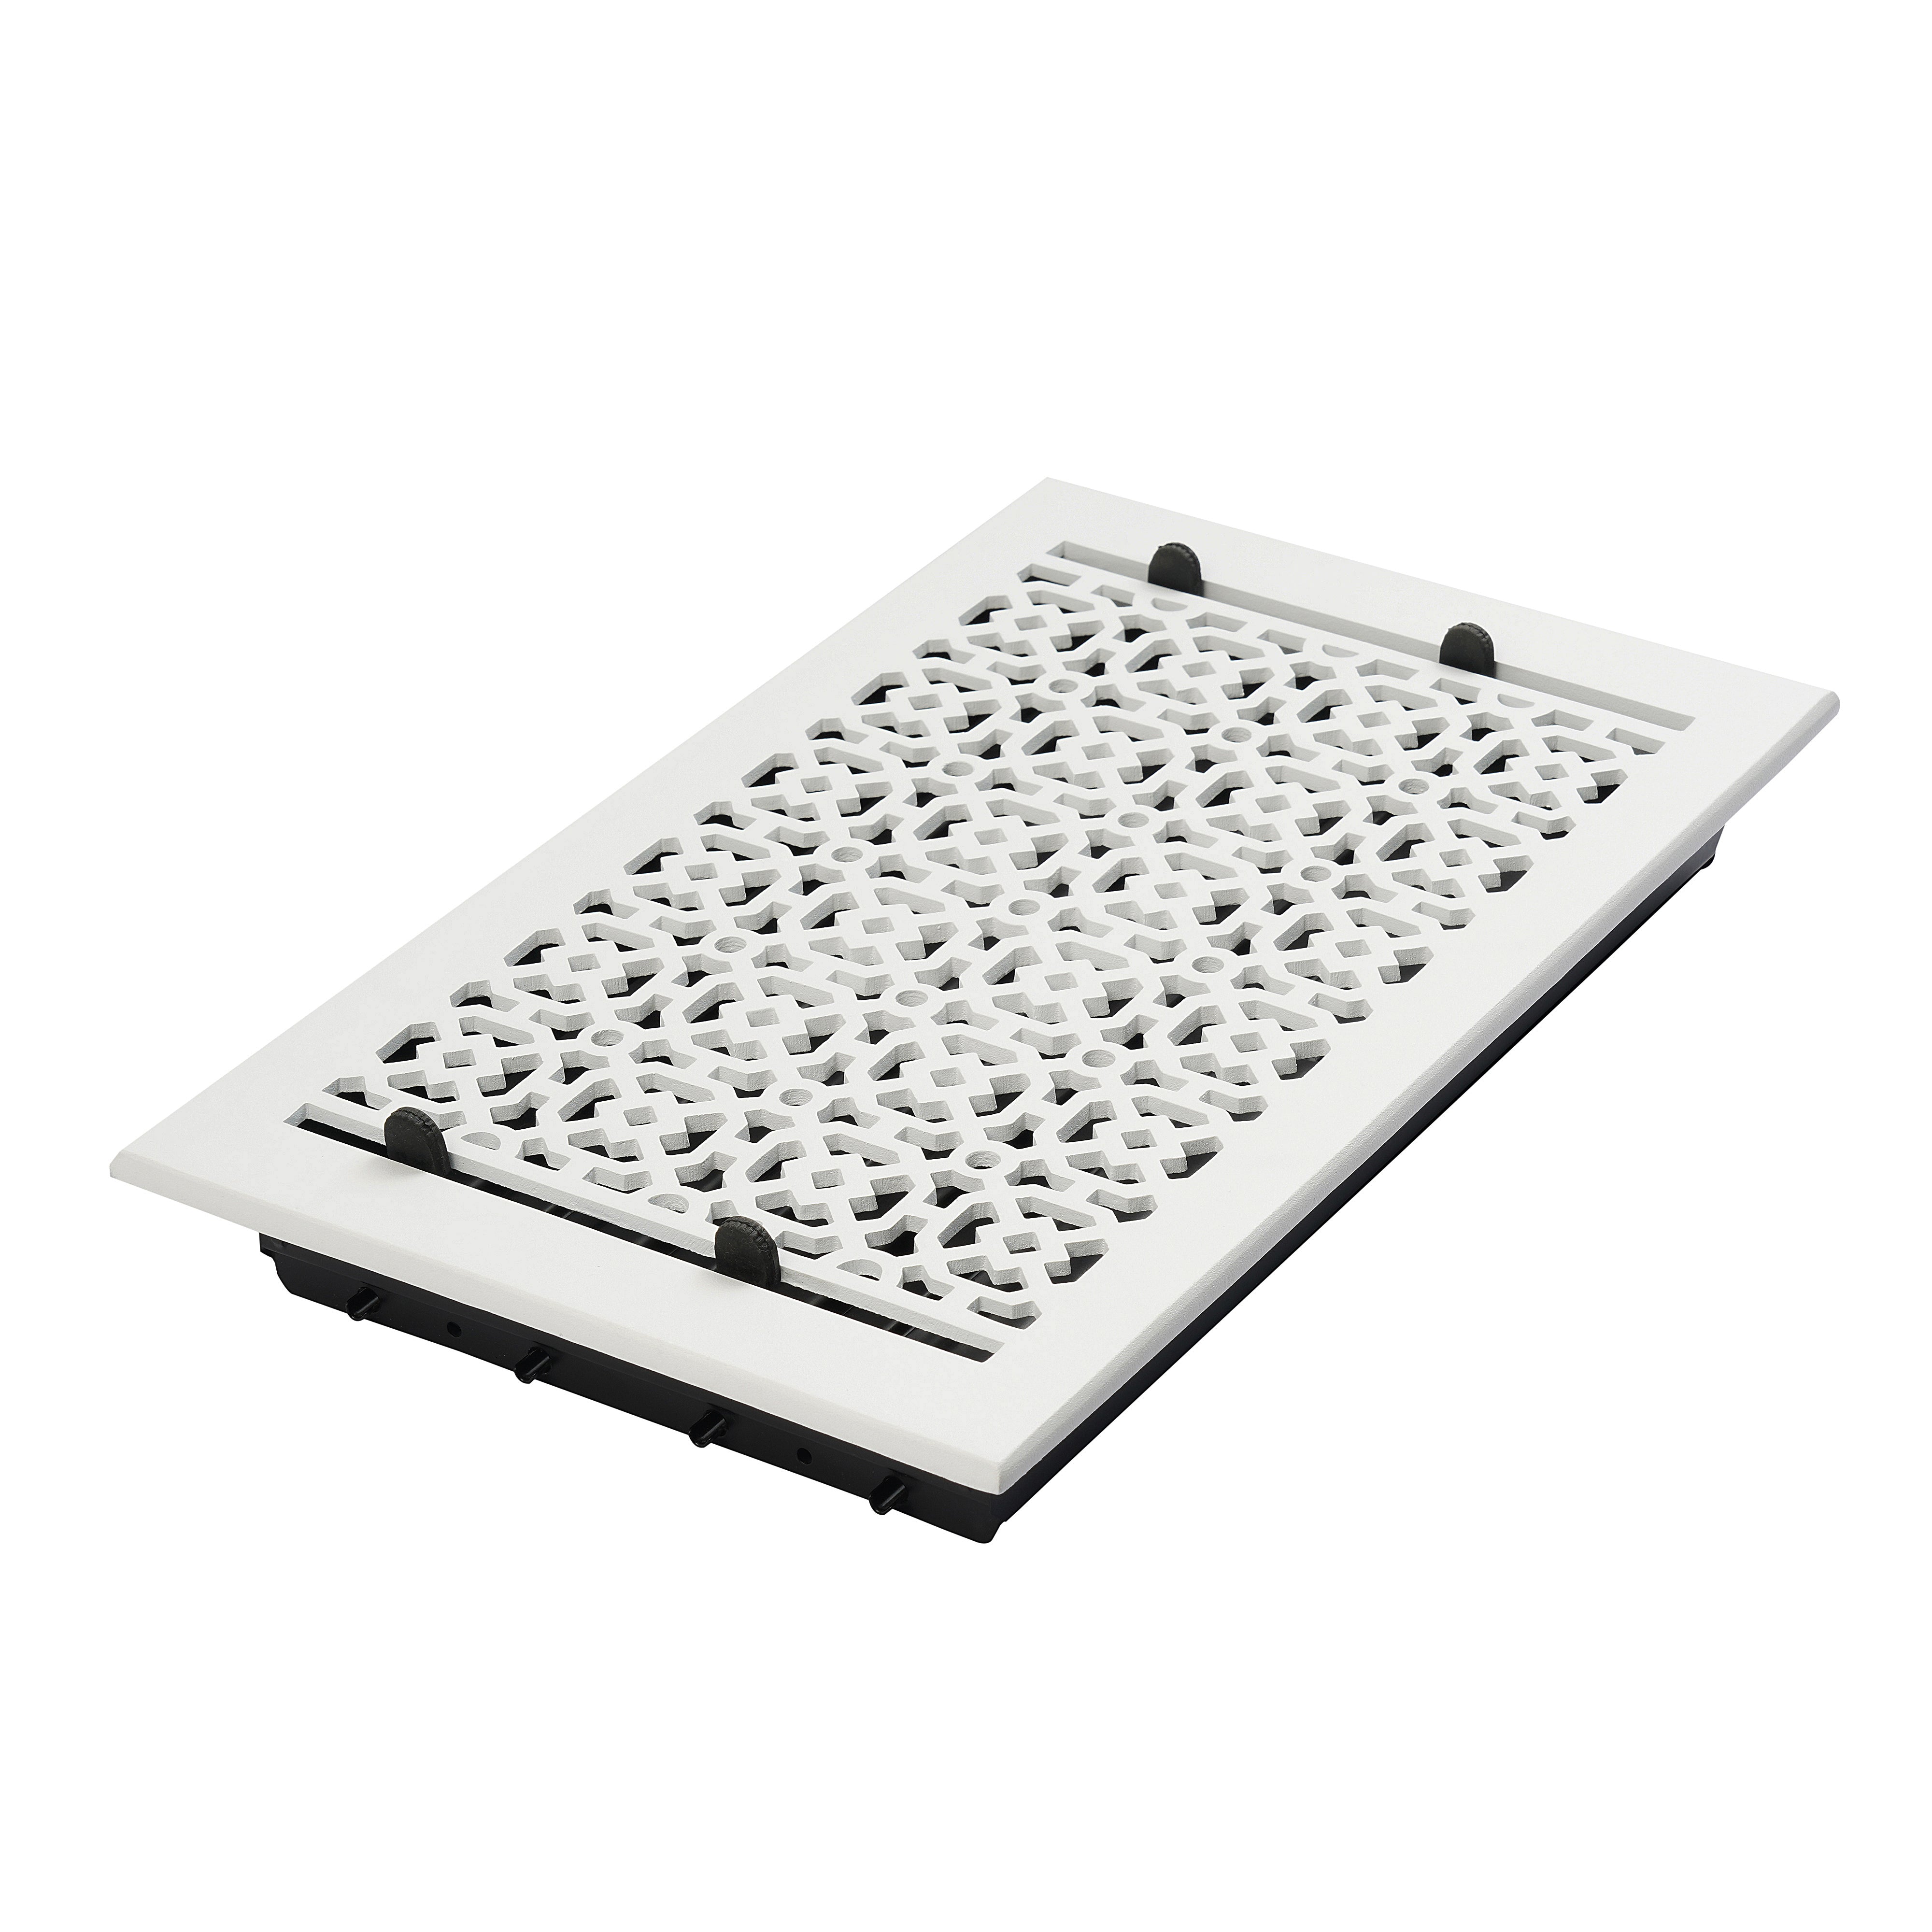 Achtek Air Supply Vent 9"x 12" Duct Opening (Overall 10-1/2"x 13-1/2"") Solid Cast Aluminium Register Cover | Powder Coated